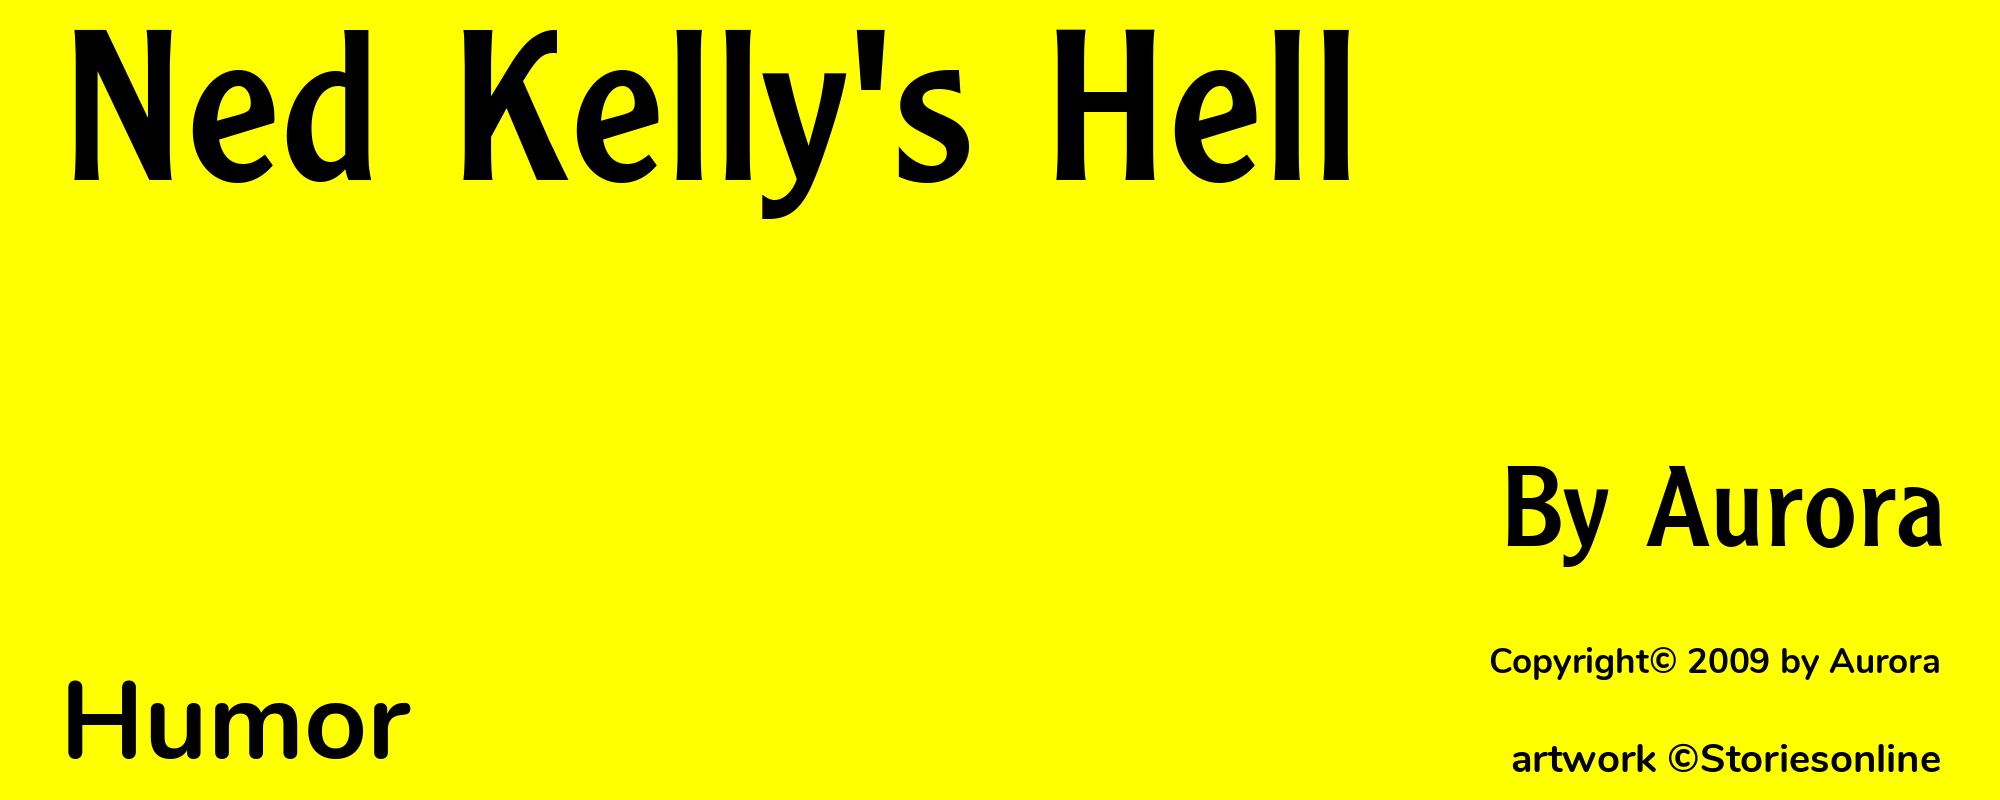 Ned Kelly's Hell - Cover